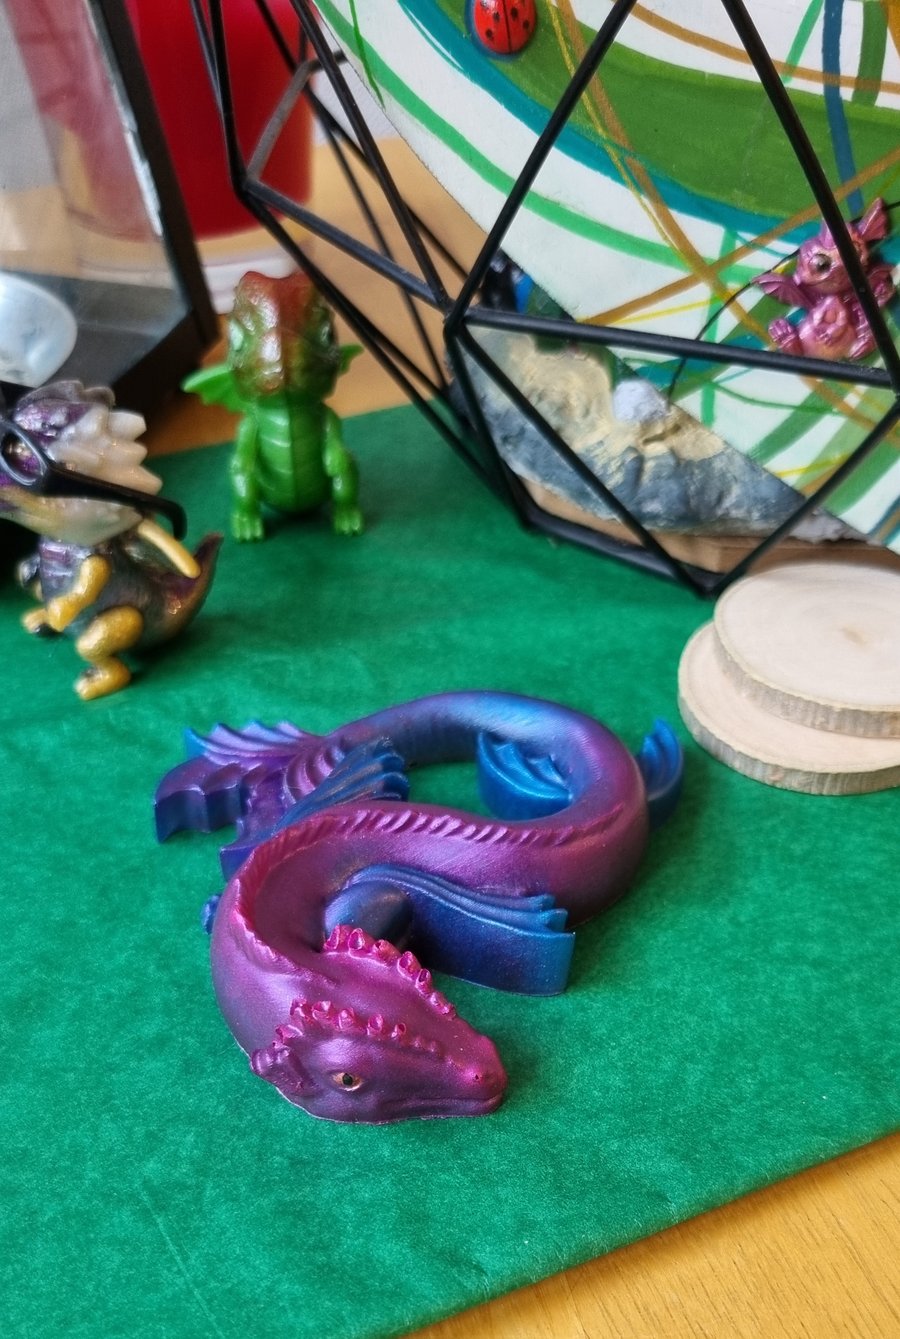 Serpent pink and blue dragon 'Sephona' (1st hatchlings)